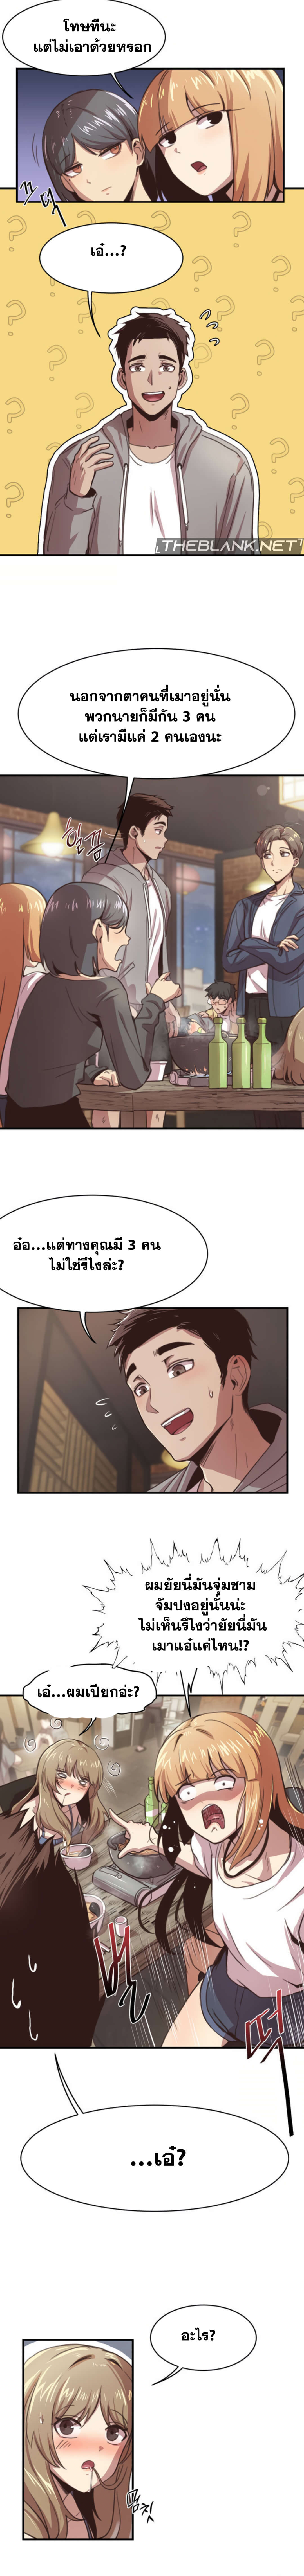 With My Brother’s Friends ตอนที่ 1 ภาพ 5